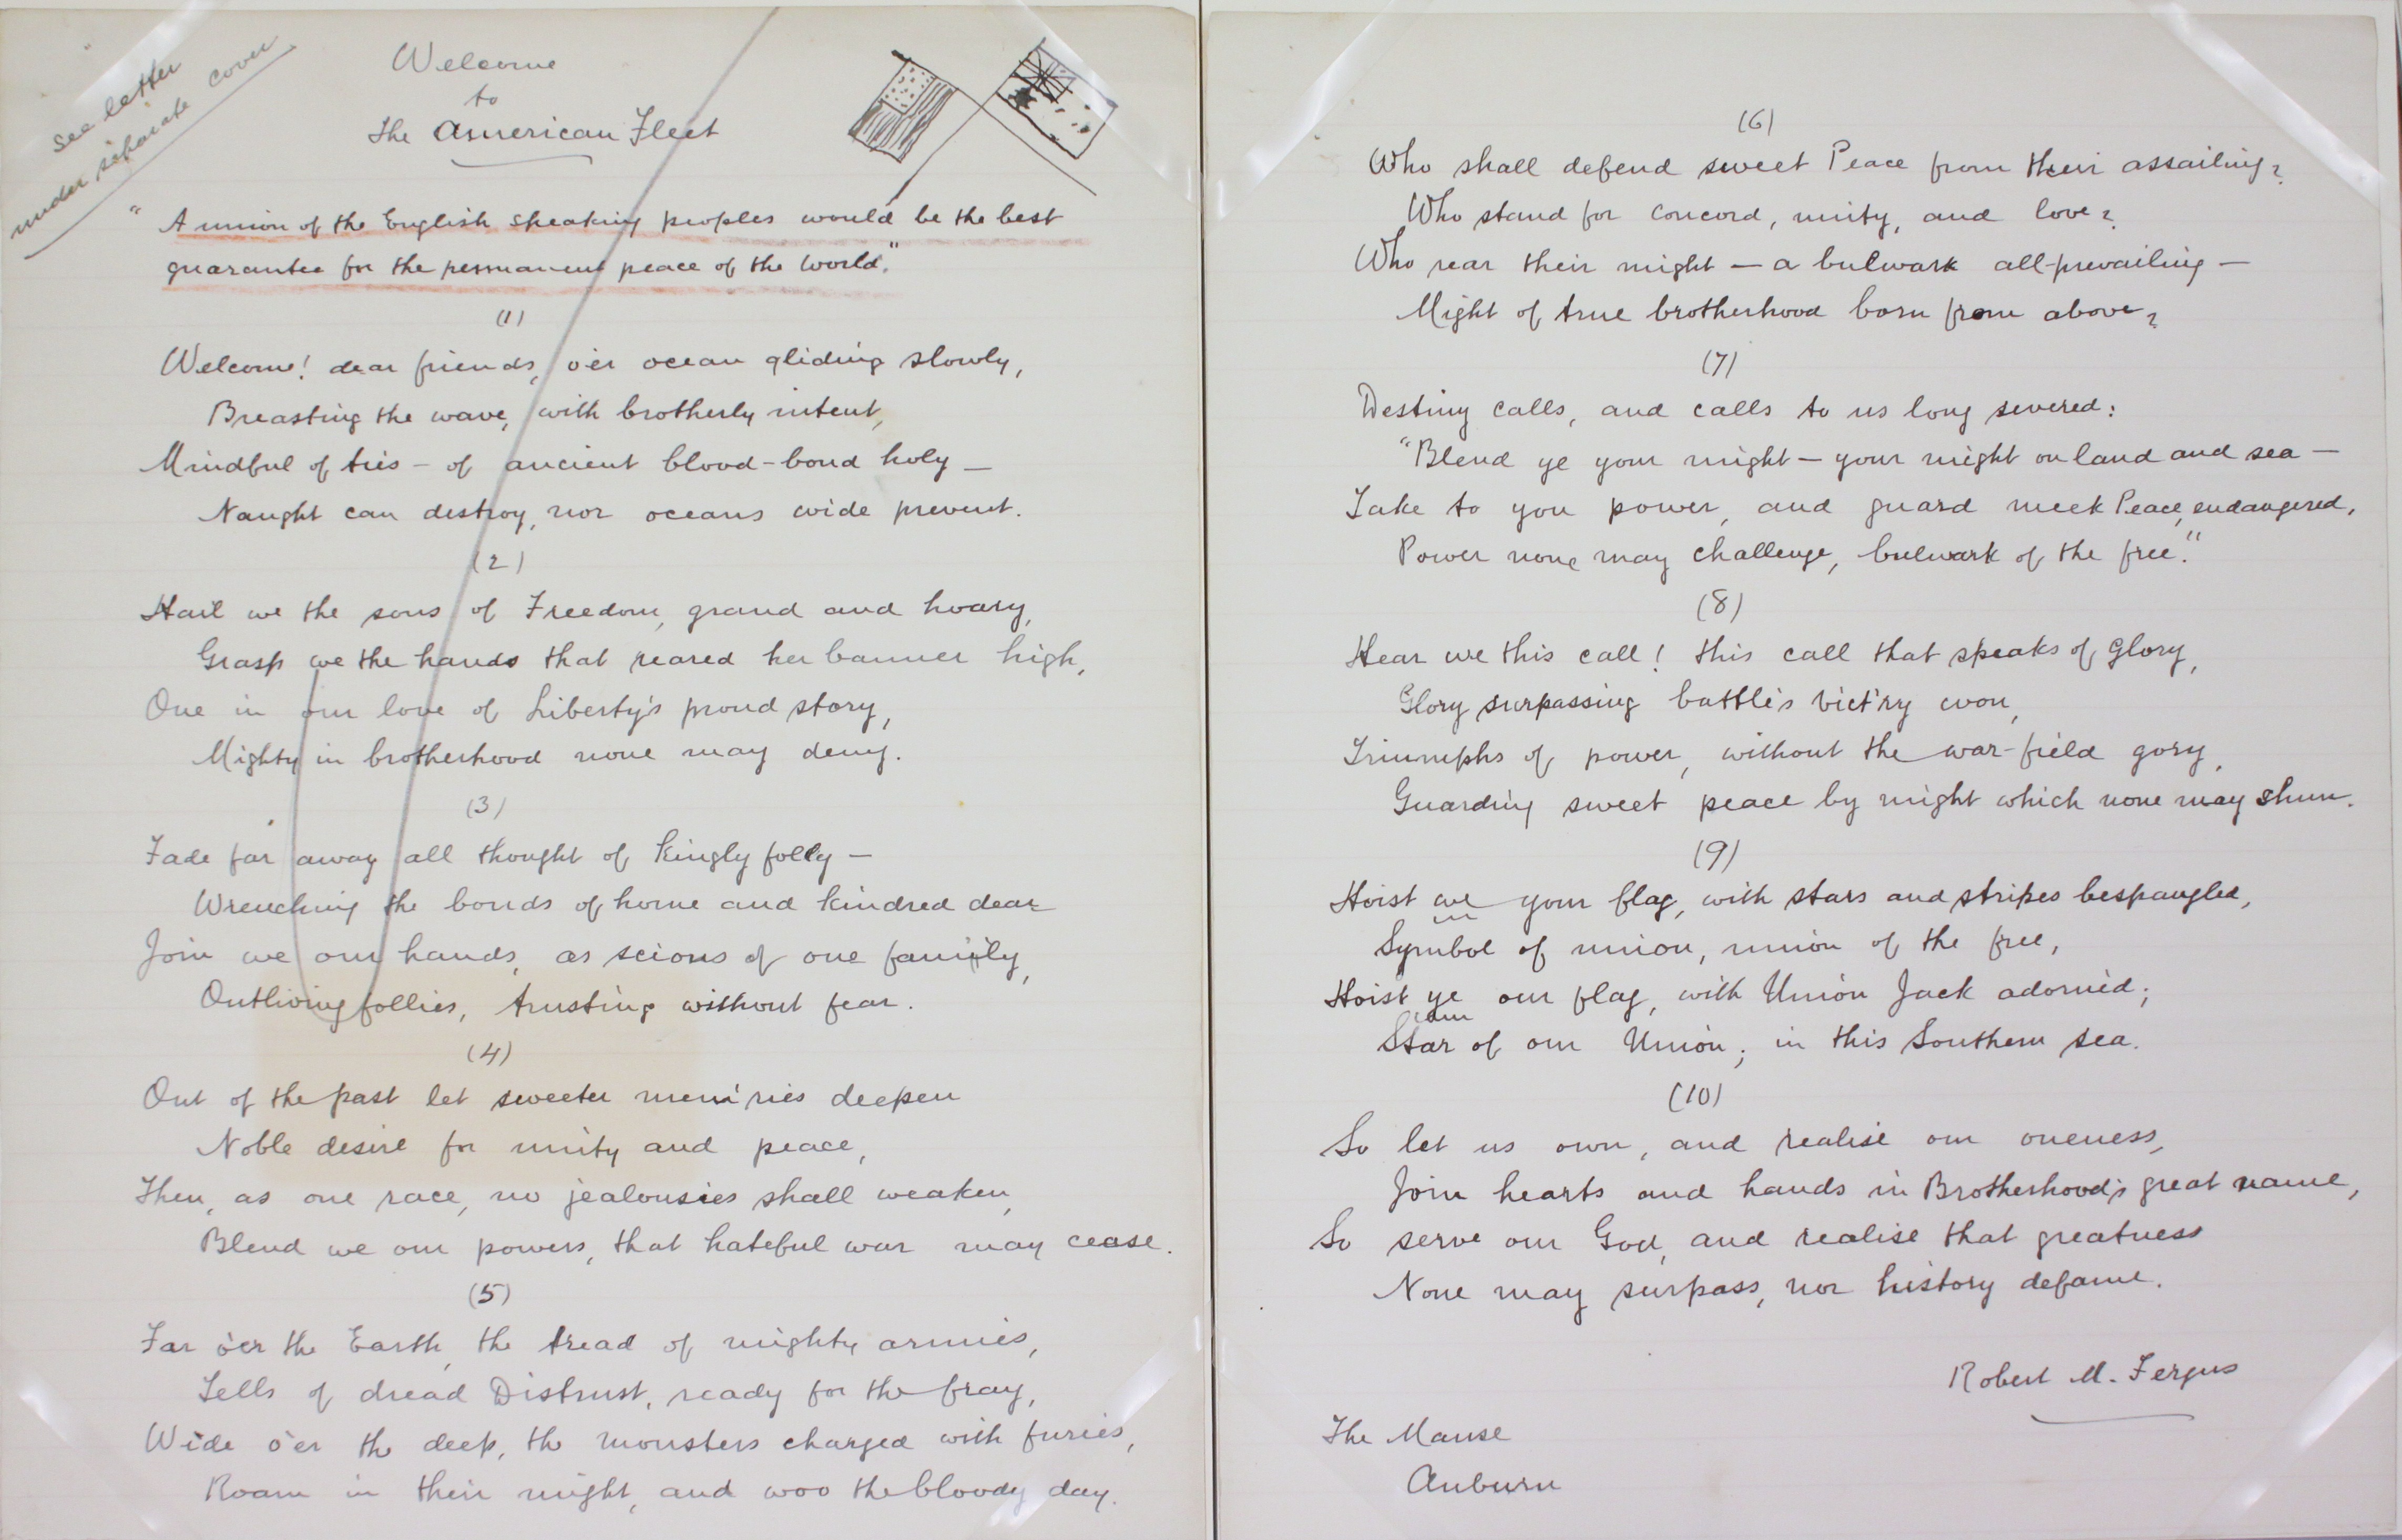 The poem 'welcome to the american fleet' handwritten on two pieces of paper